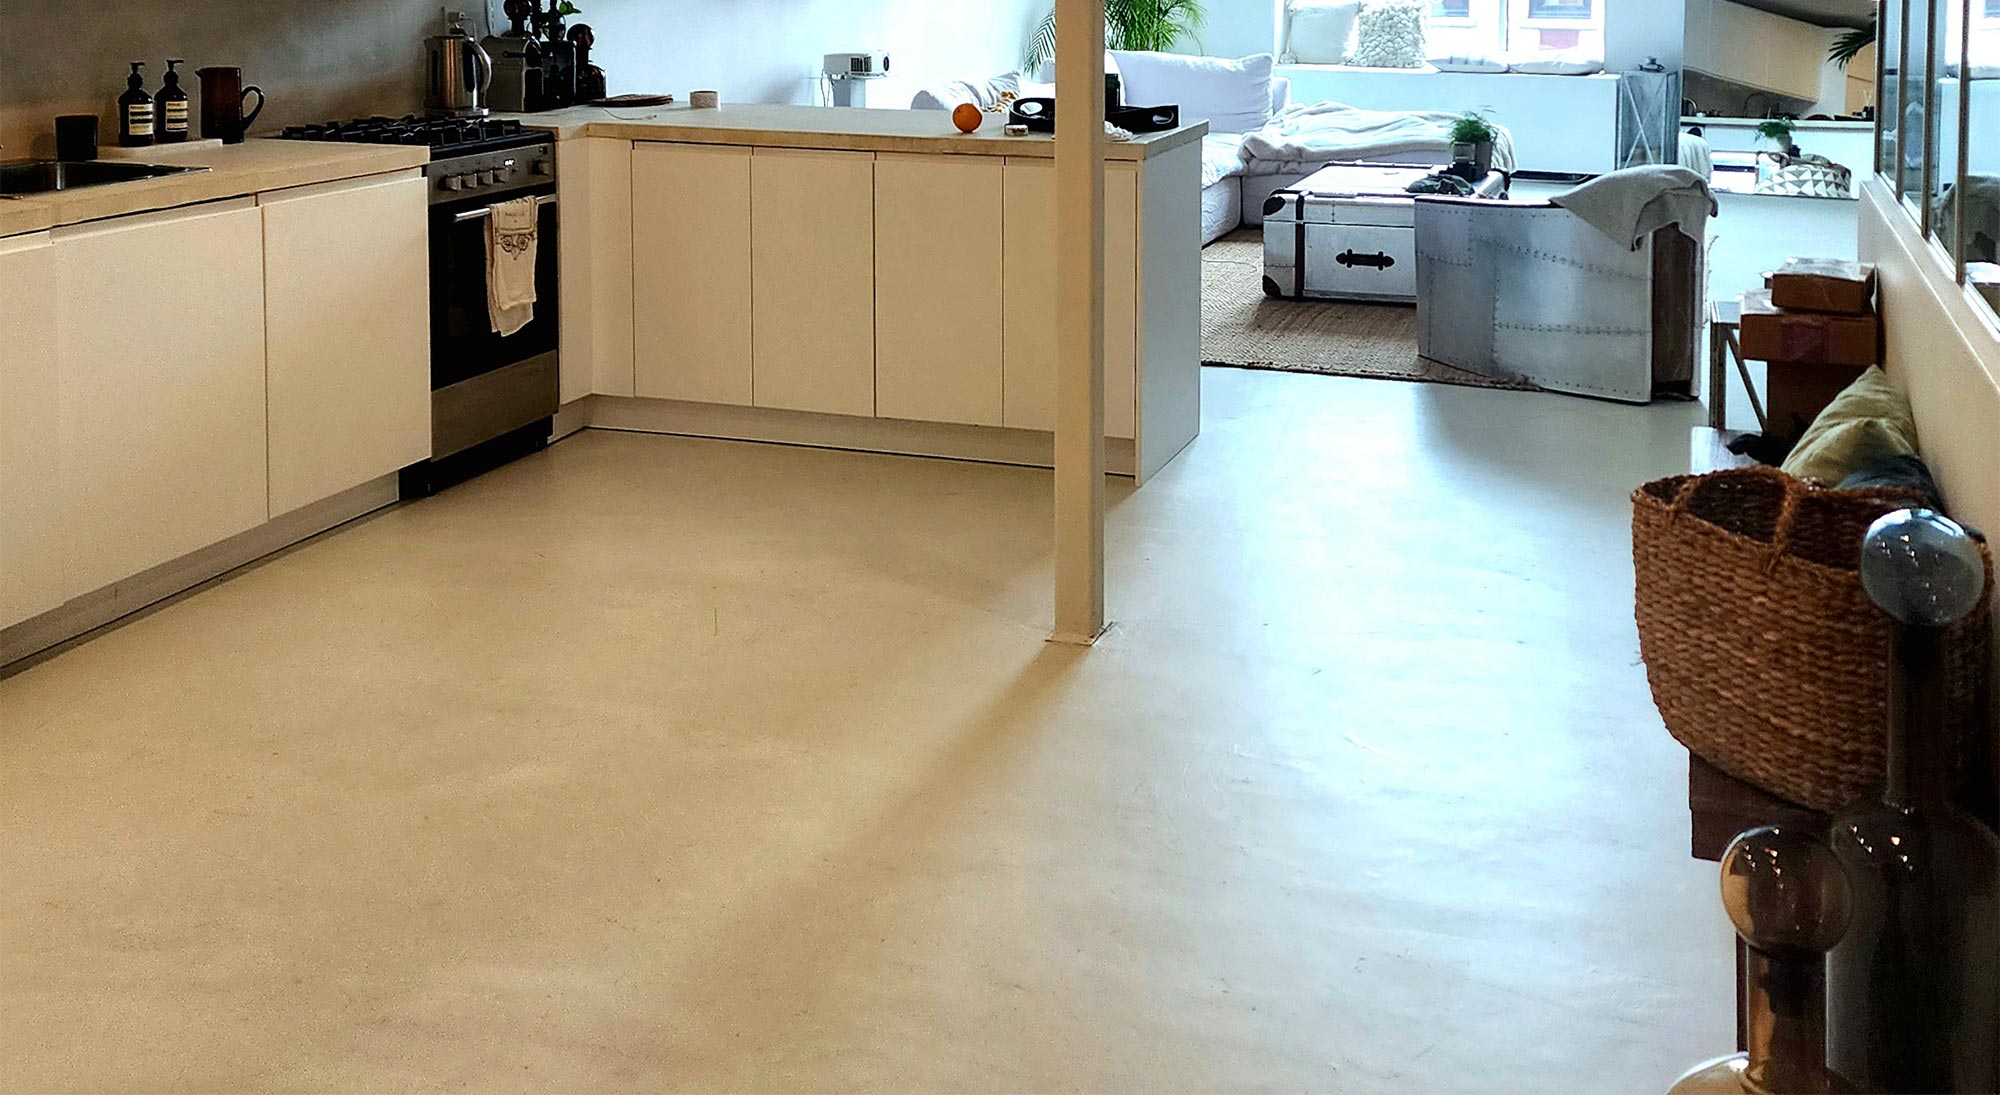 Skraffino microtopping in kitchen Concrete Microtopping Over Radiant Heat Flooring | Duraamen Engineered Products Inc